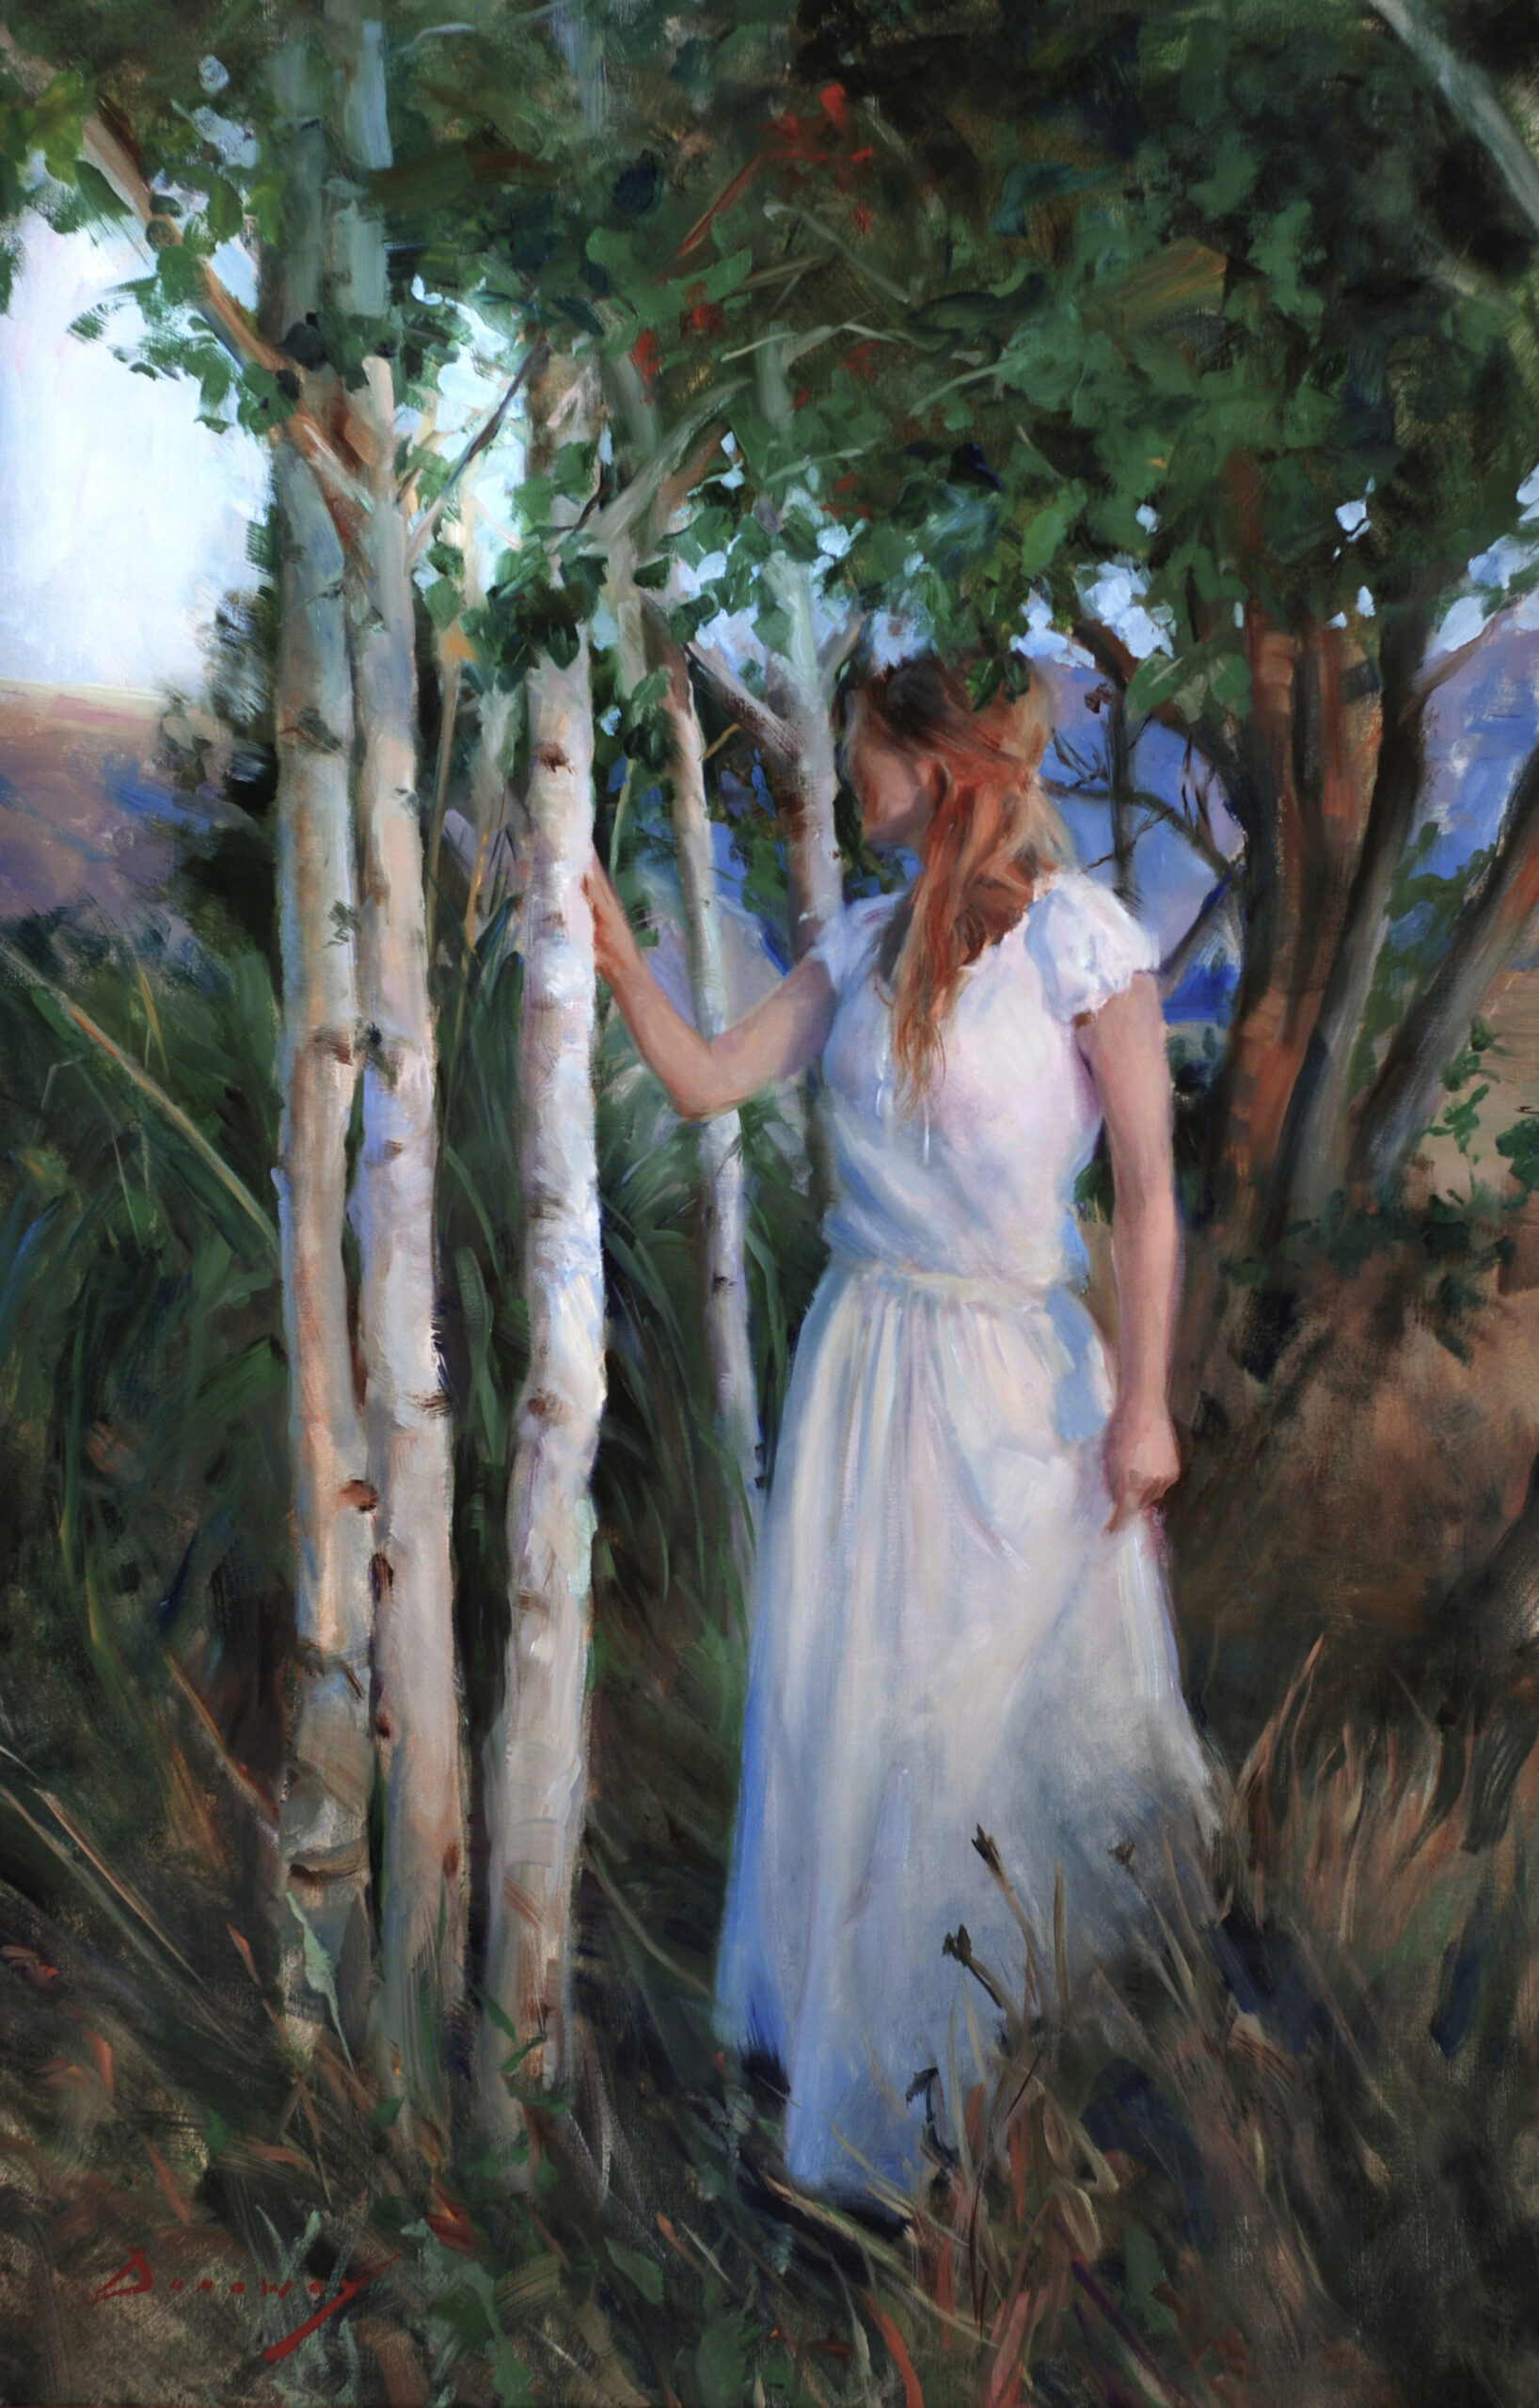 Figurative art - Michelle Dunaway, "Among the Aspens," 40 x 26 inches, Oil on linen